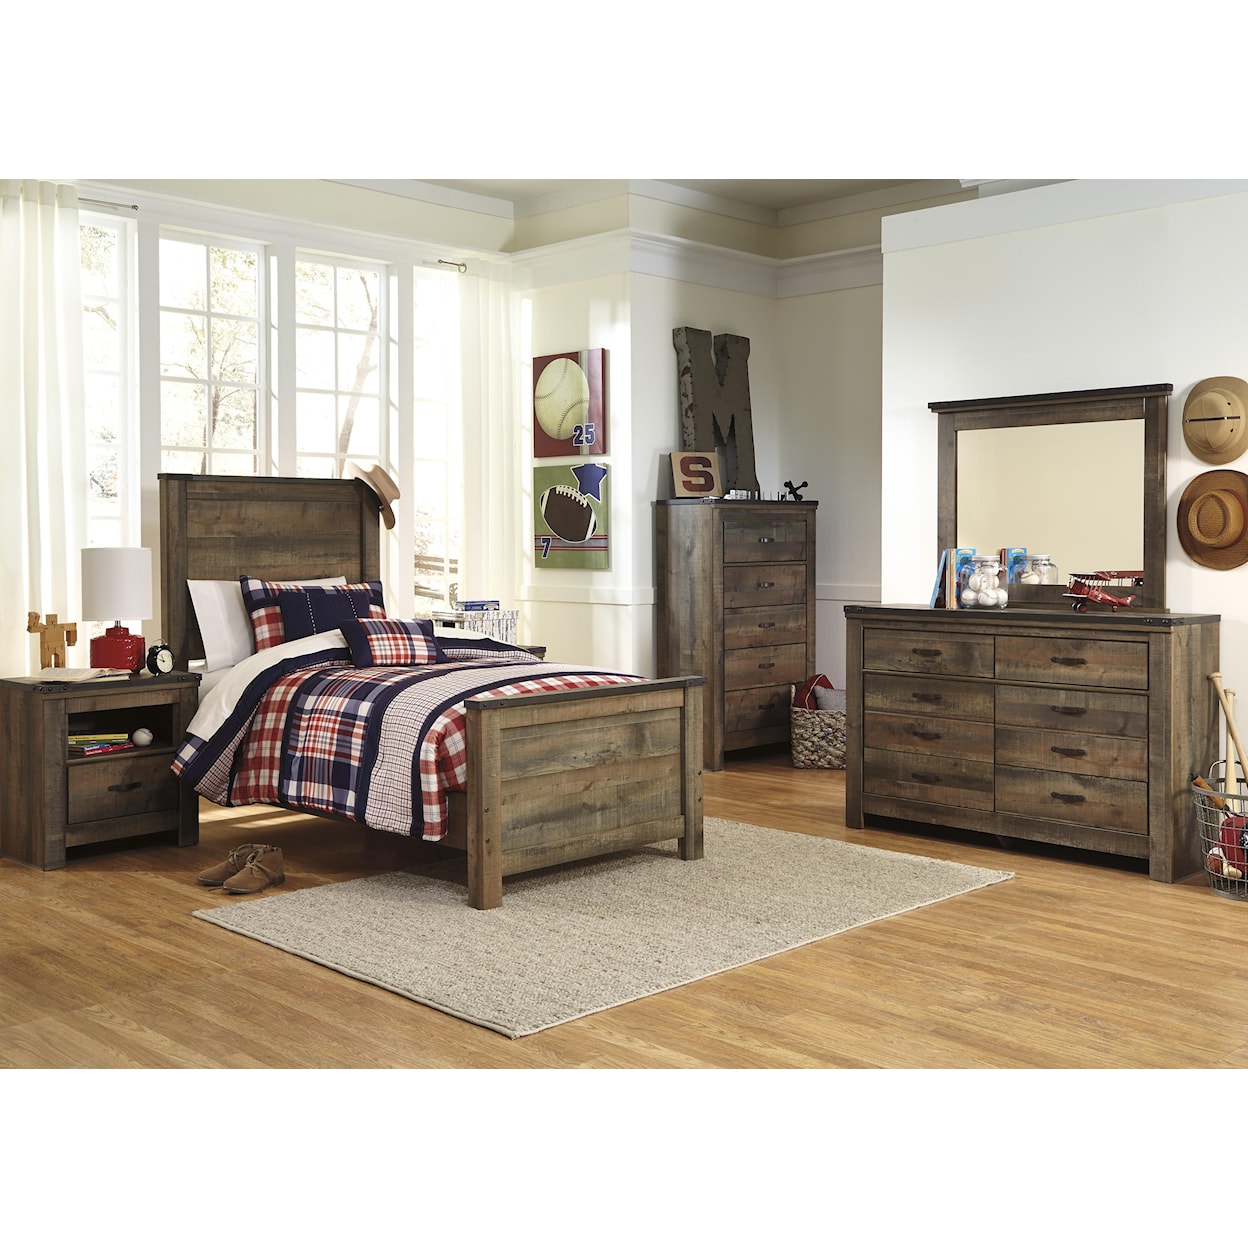 Ashley Furniture Signature Design Trinell Twin Bedroom Group